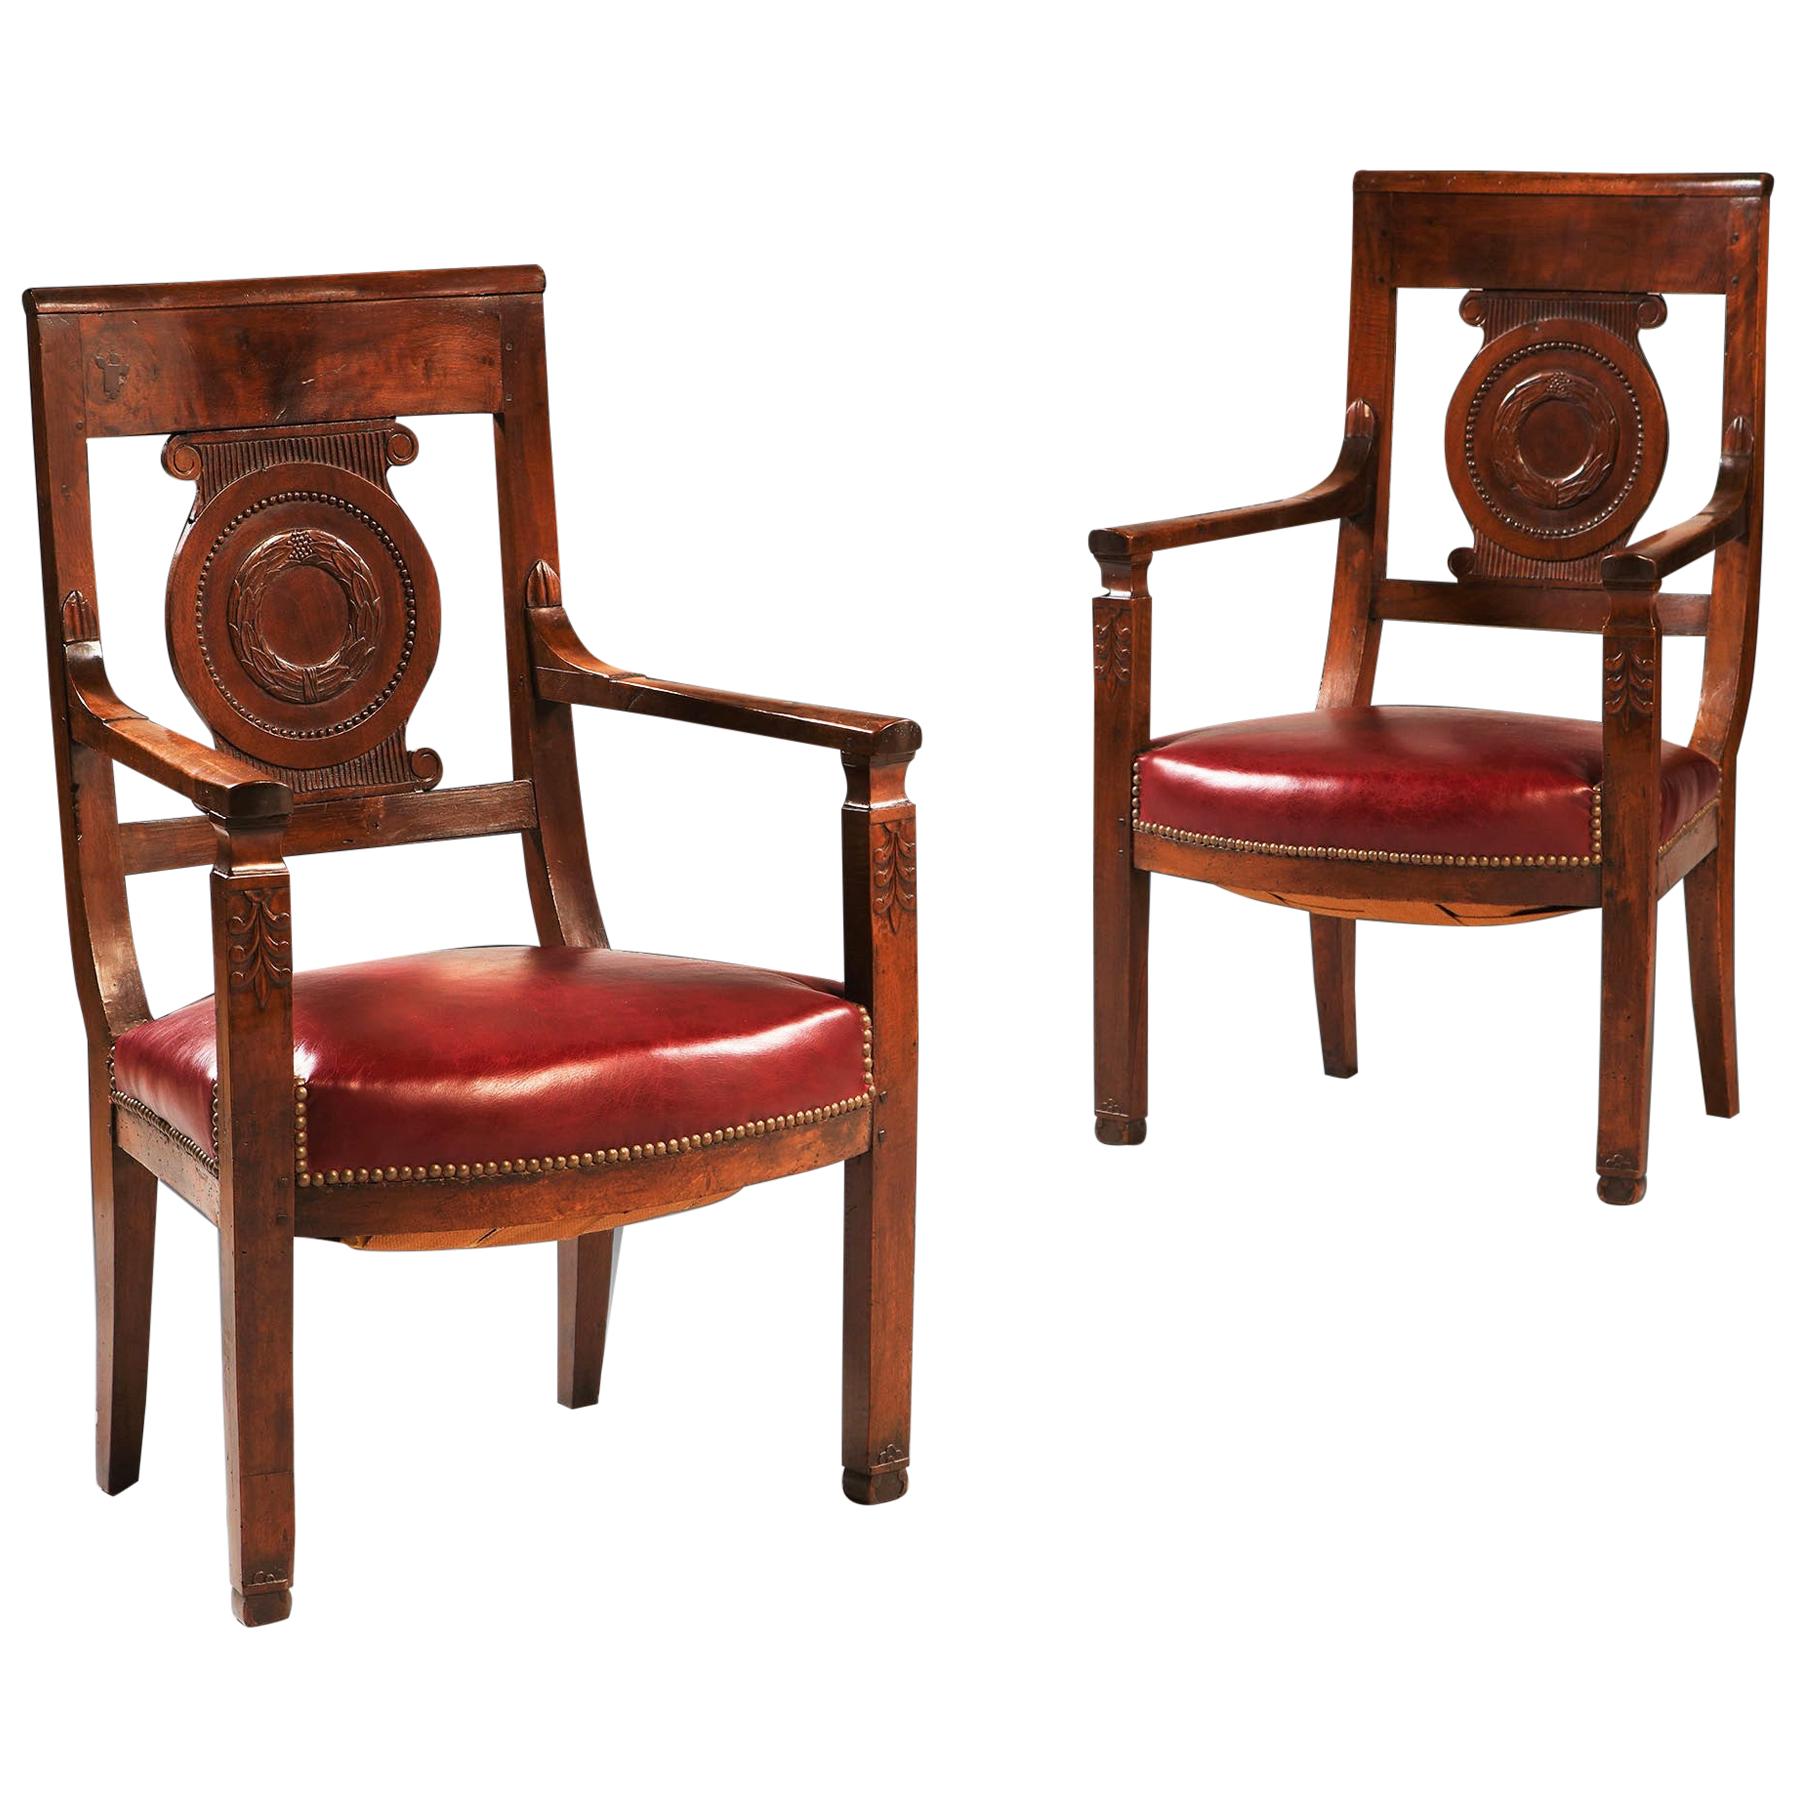 Empire Fauteuil or Armchair at 1stDibs